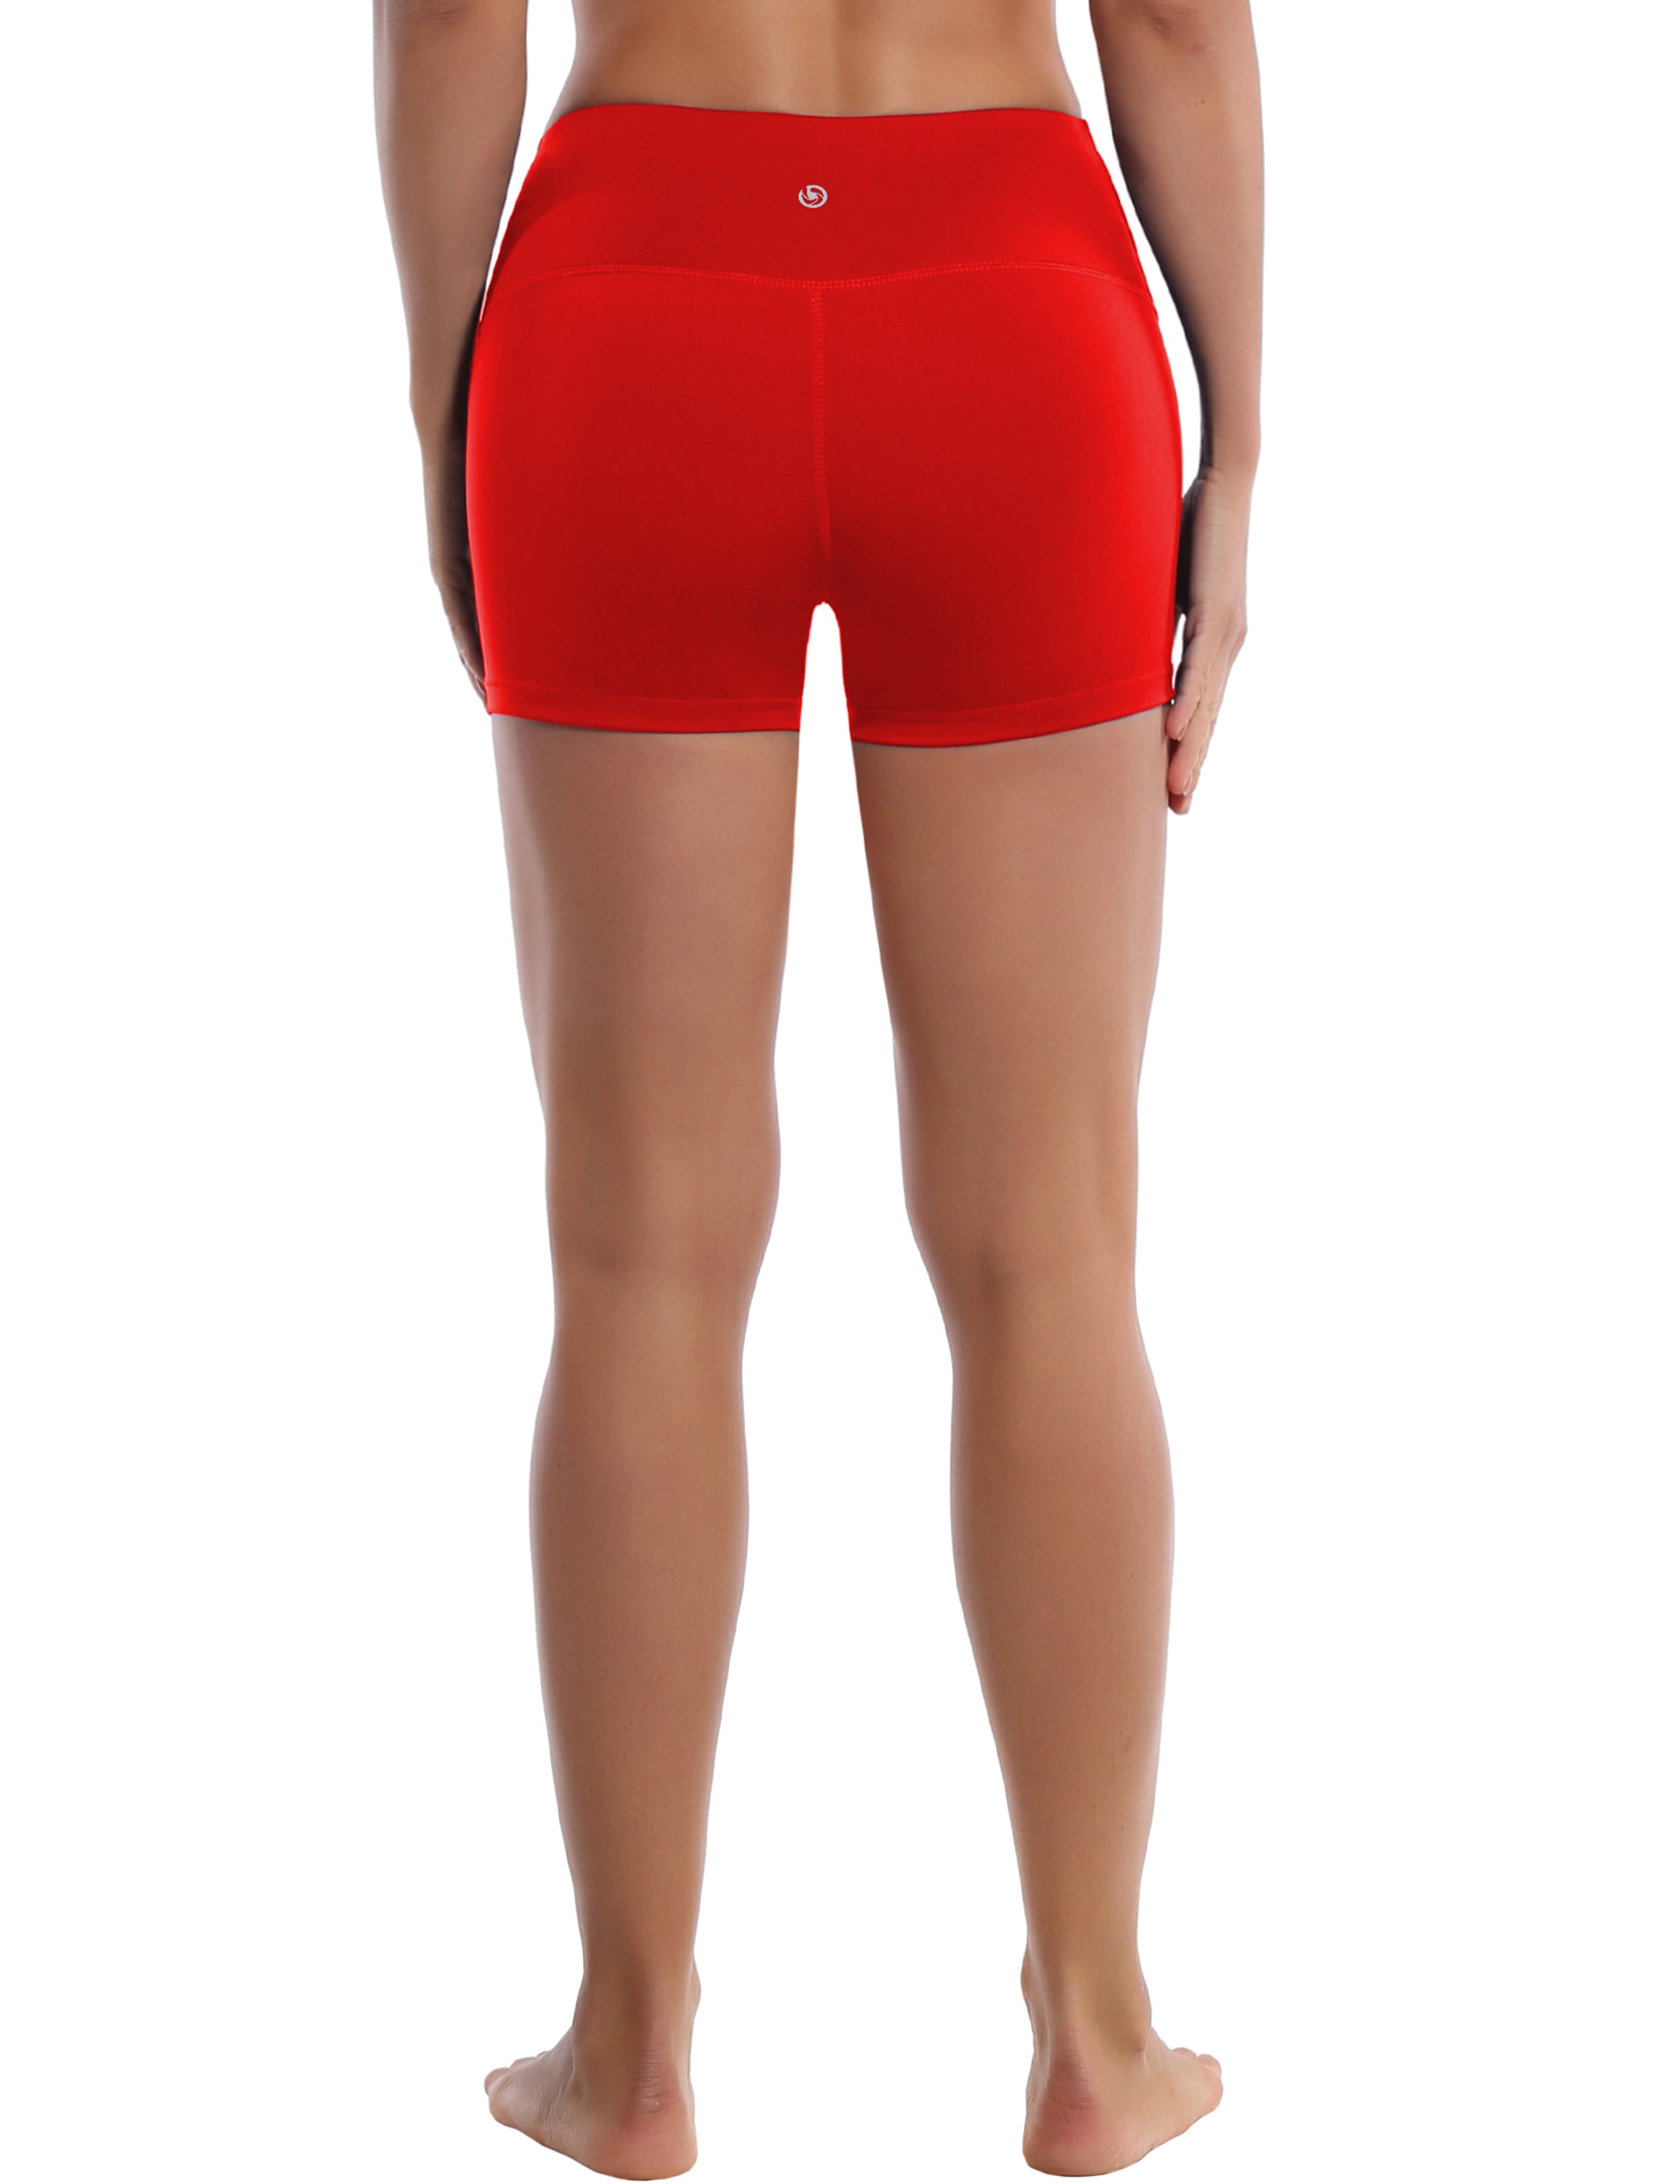 2.5" Running Shorts scarlet Softest-ever fabric High elasticity High density 4-way stretch Fabric doesn't attract lint easily No see-through Moisture-wicking Machine wash 75% Nylon, 25% Spandex